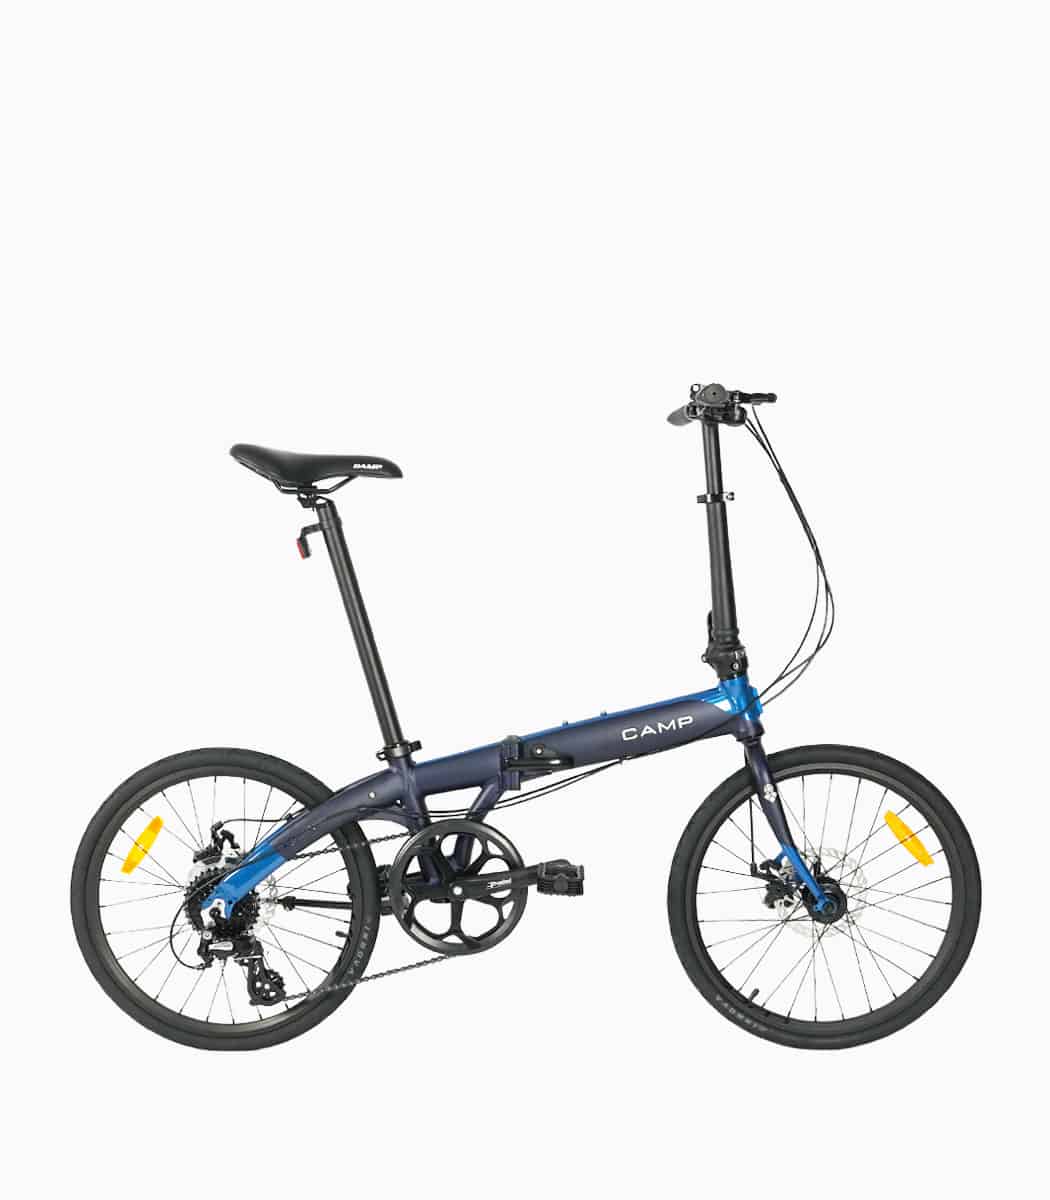 CAMP Polo 8 (BLUE) foldable bicycle right